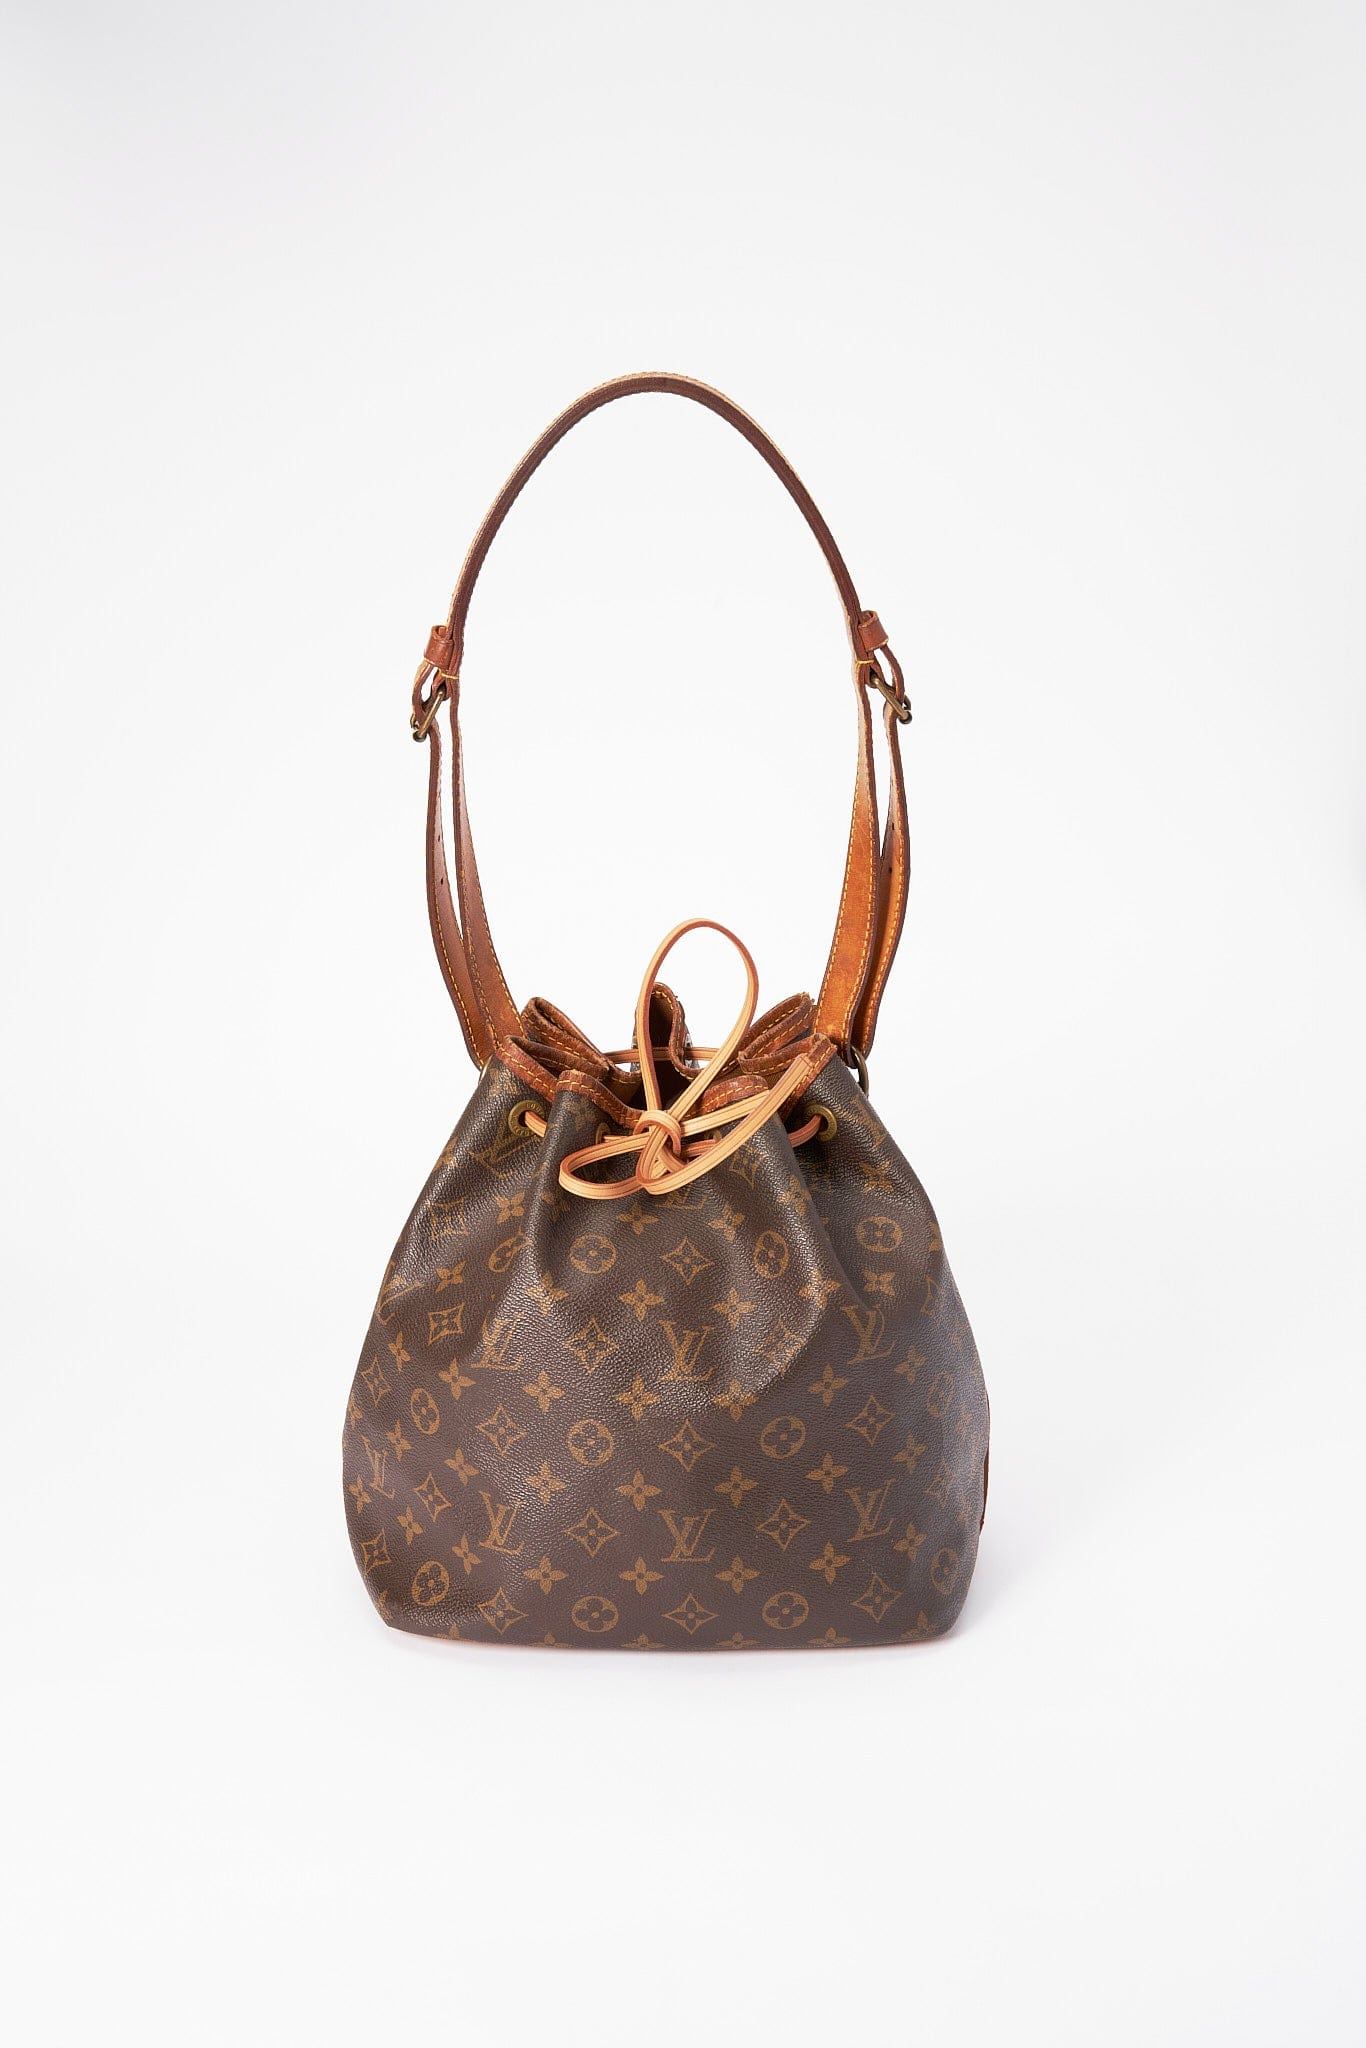 Cleaning a Vintage Louis Vuitton Petite Noe bag - Before and after